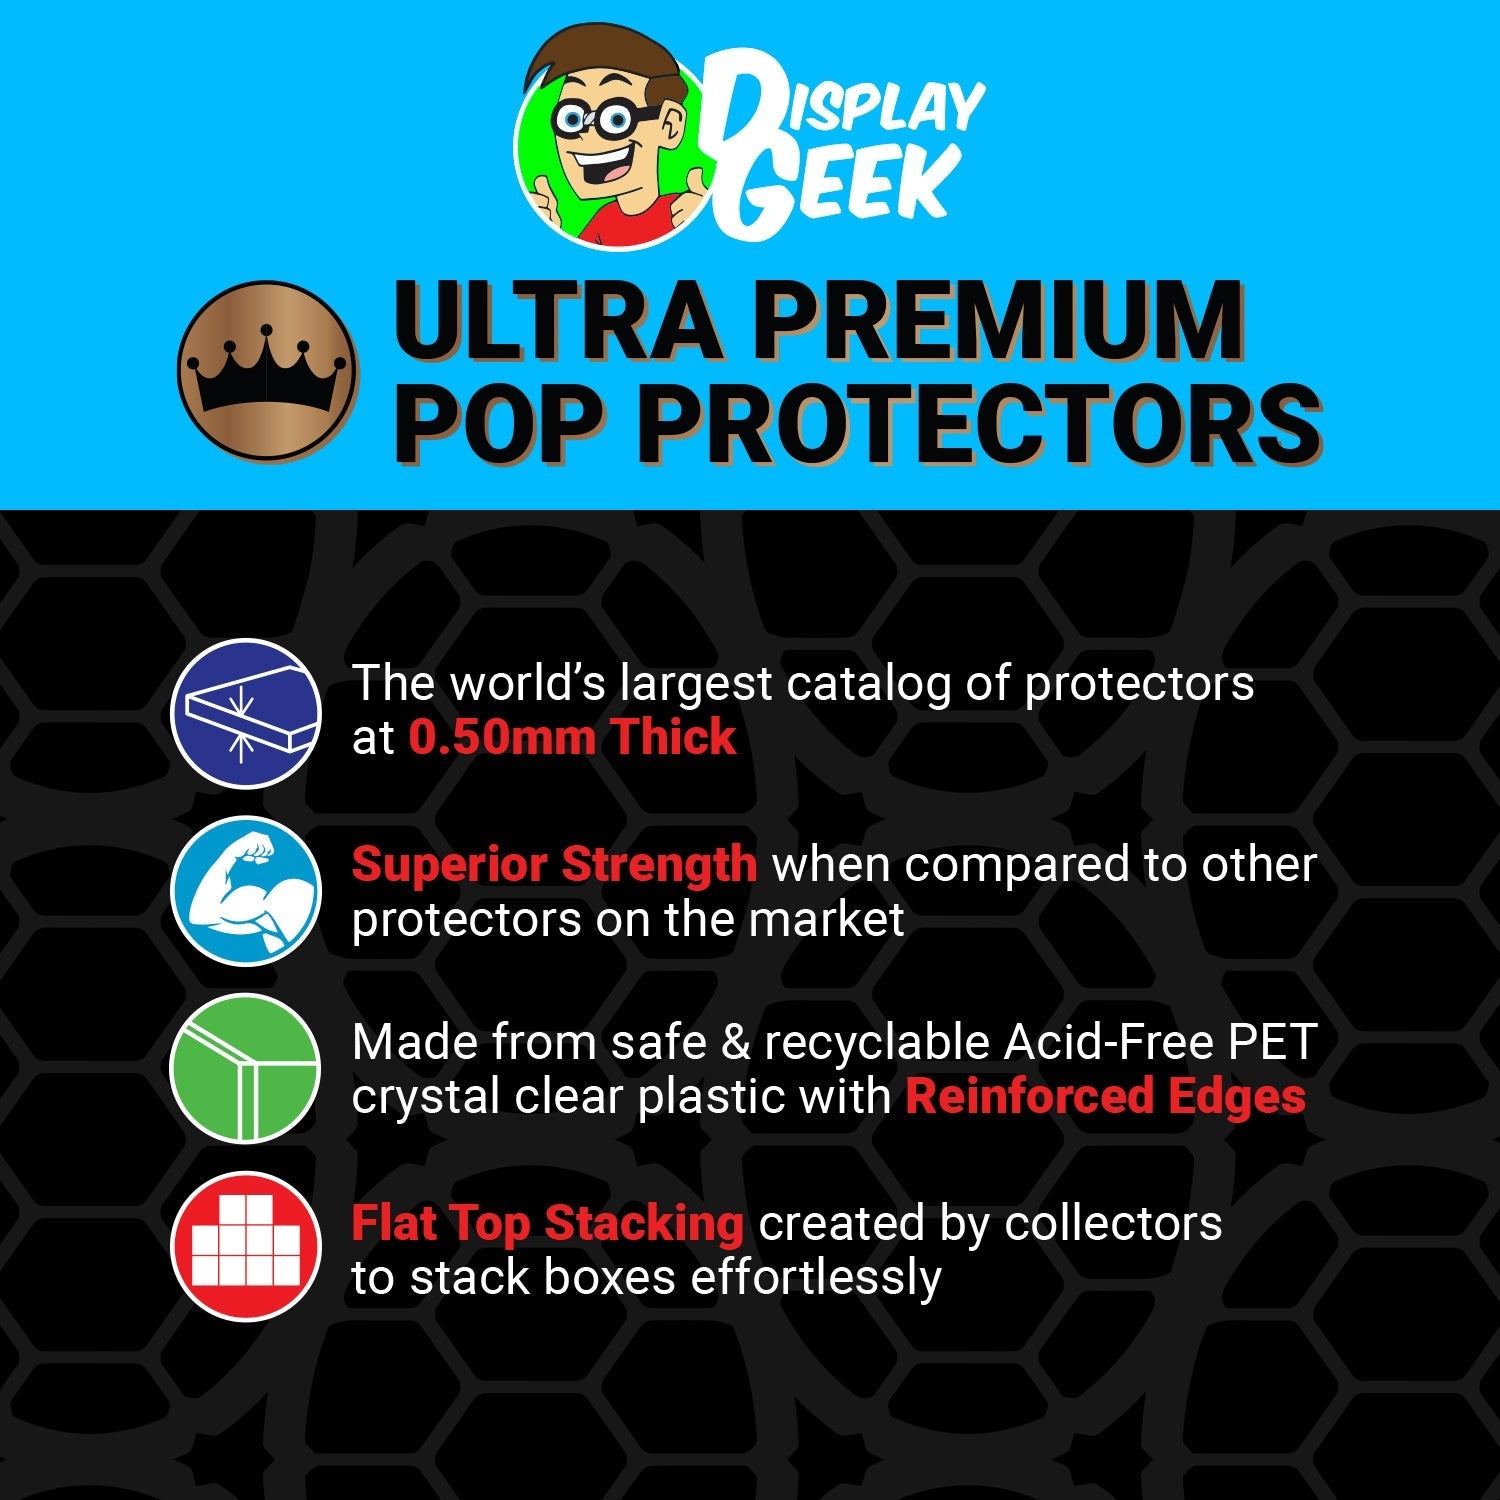 Pop Protector for 10 inch Bullseye Target #32 Jumbo Funko Pop - PPG Pop Protector Guide Search Created by Display Geek